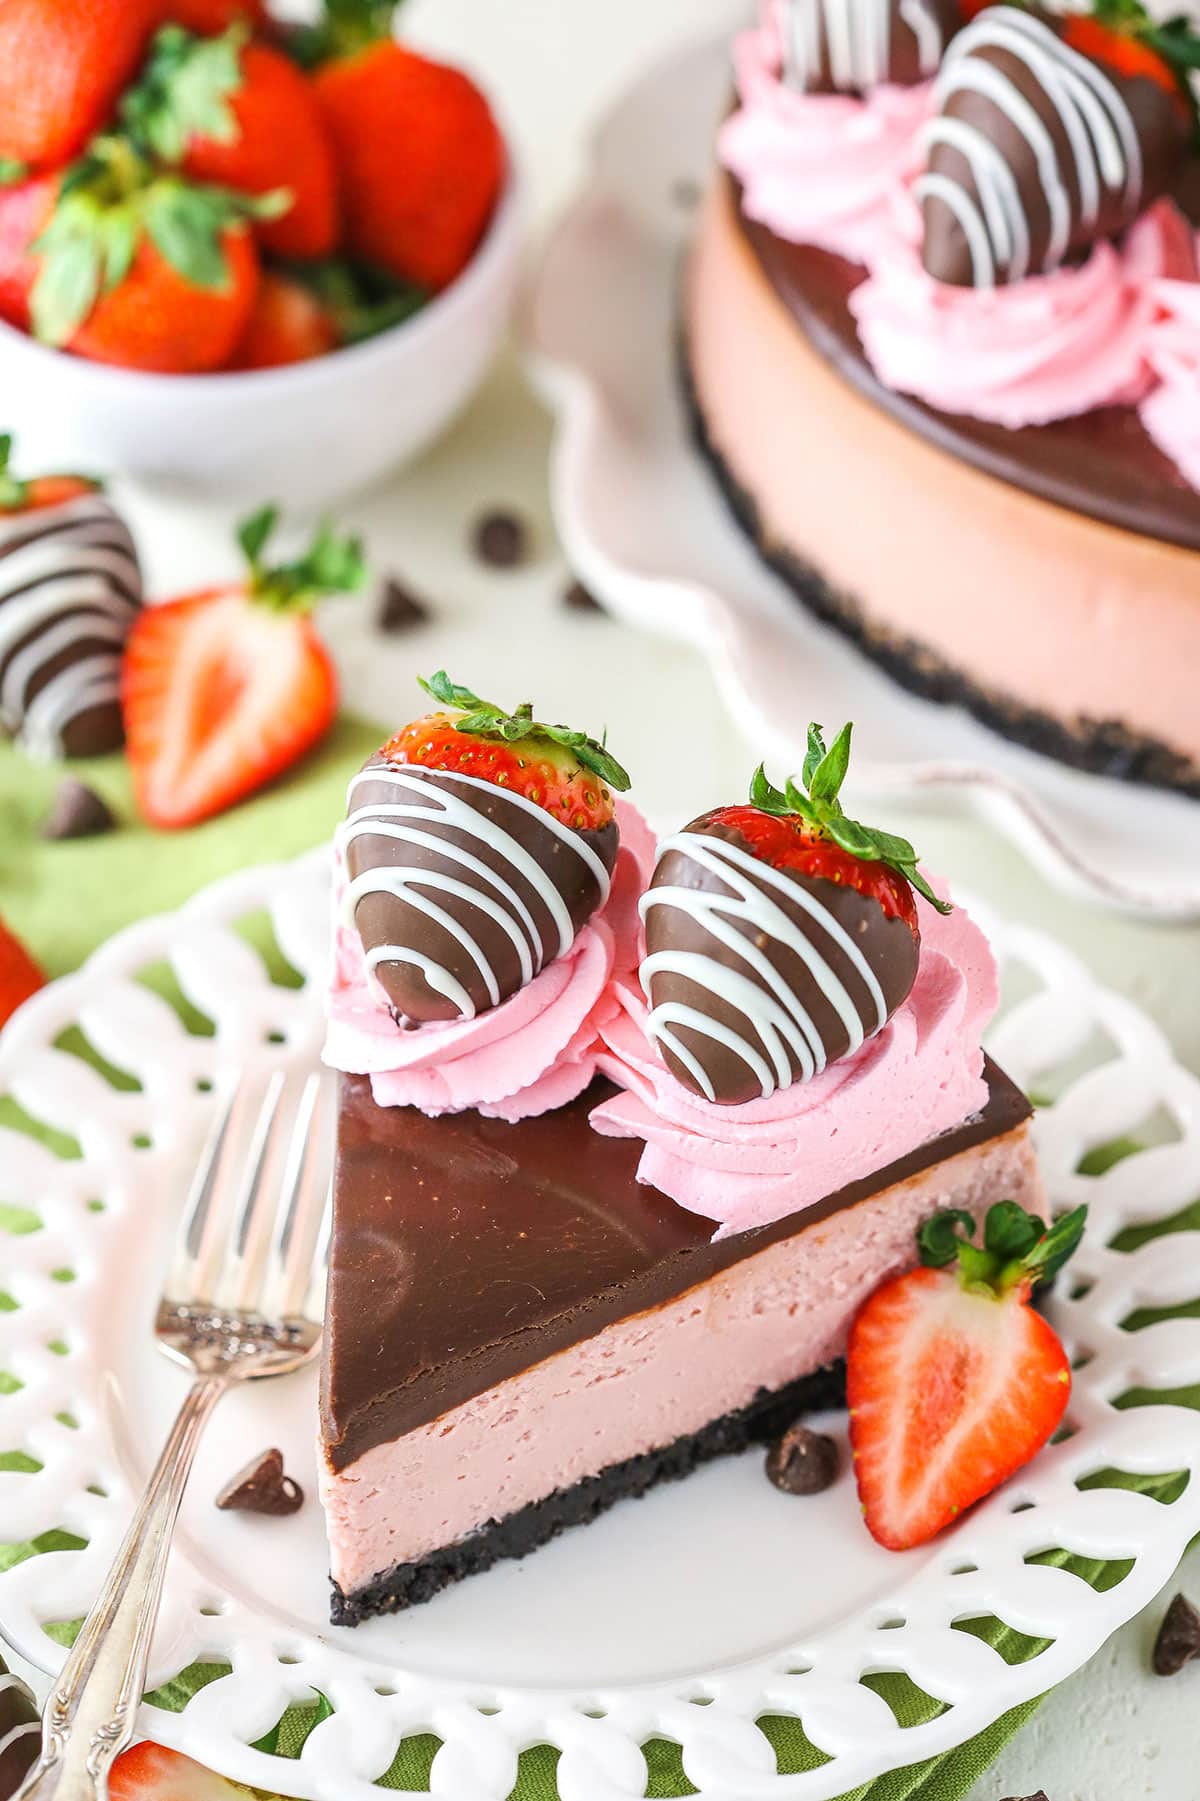 A slice of Chocolate Covered Strawberry Cheesecake next to a silver fork on a white plate